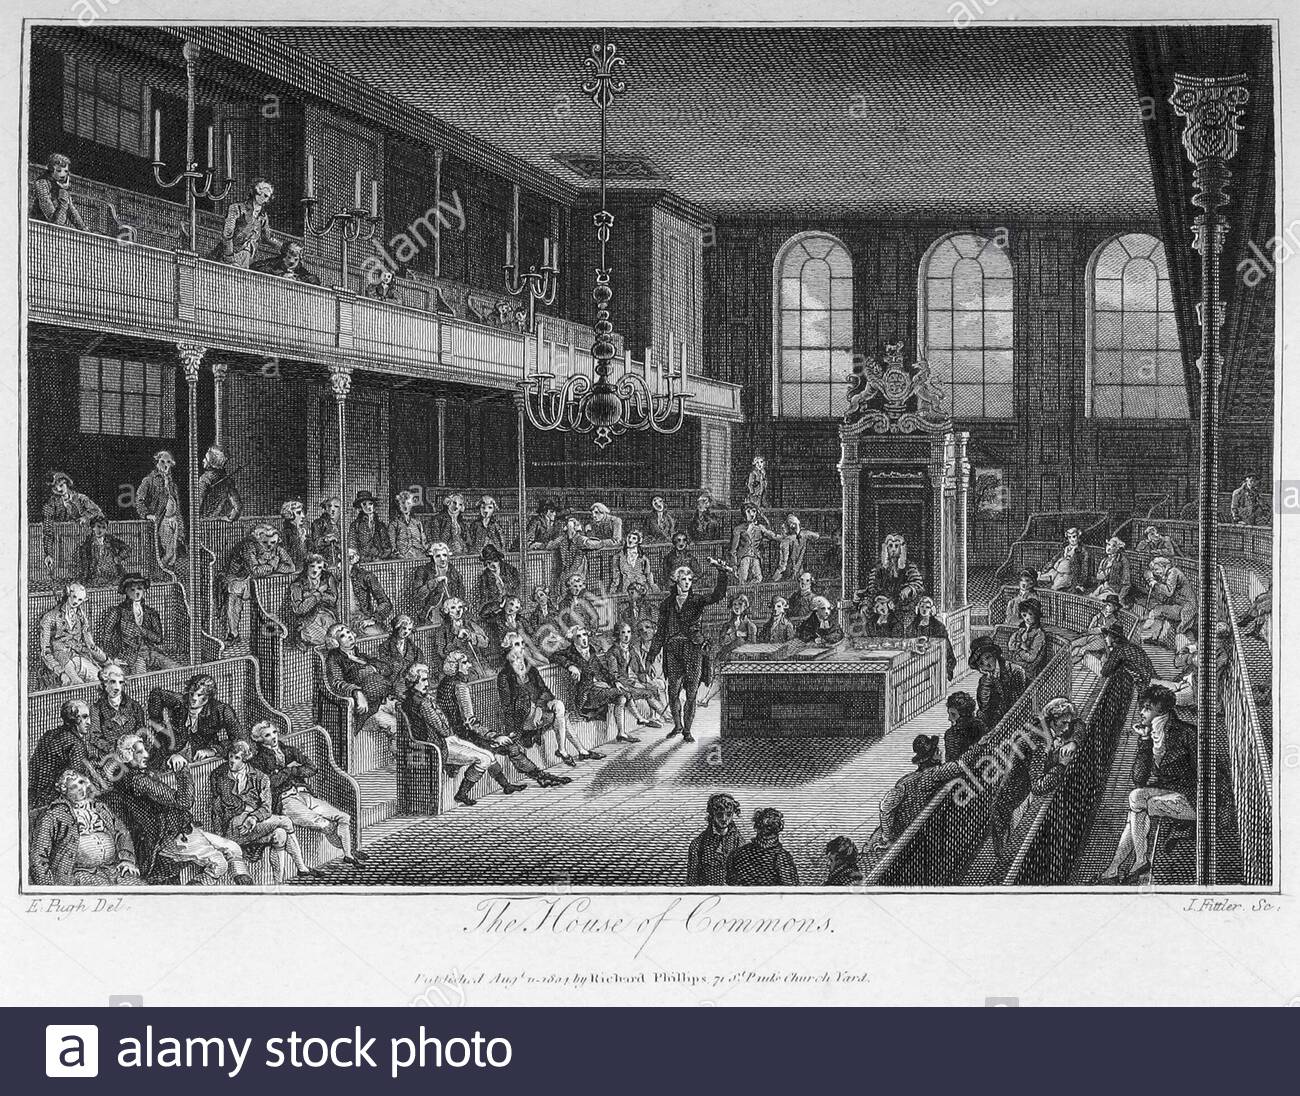 Interior of the House of Commons, London England, vintage illustration from 1804 Stock Photo